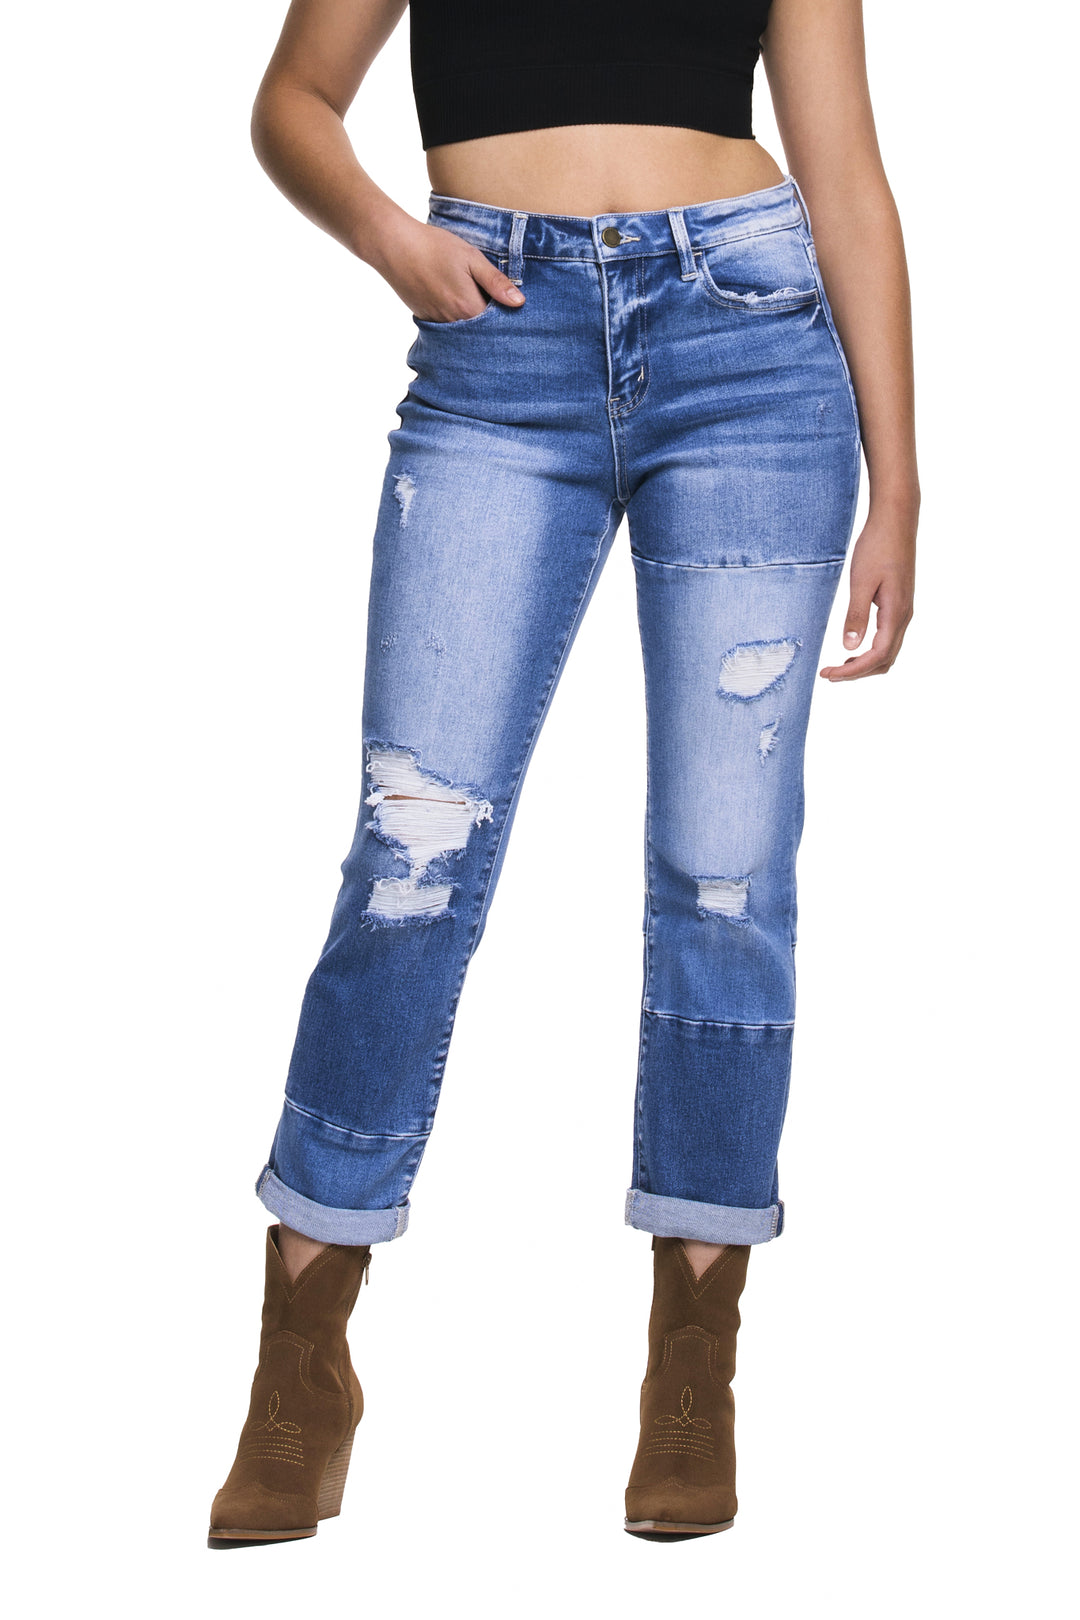 Diligent - Stretch Boyfriend Color Block Jeans with Rolled Cuff - Expressive Collective CO.